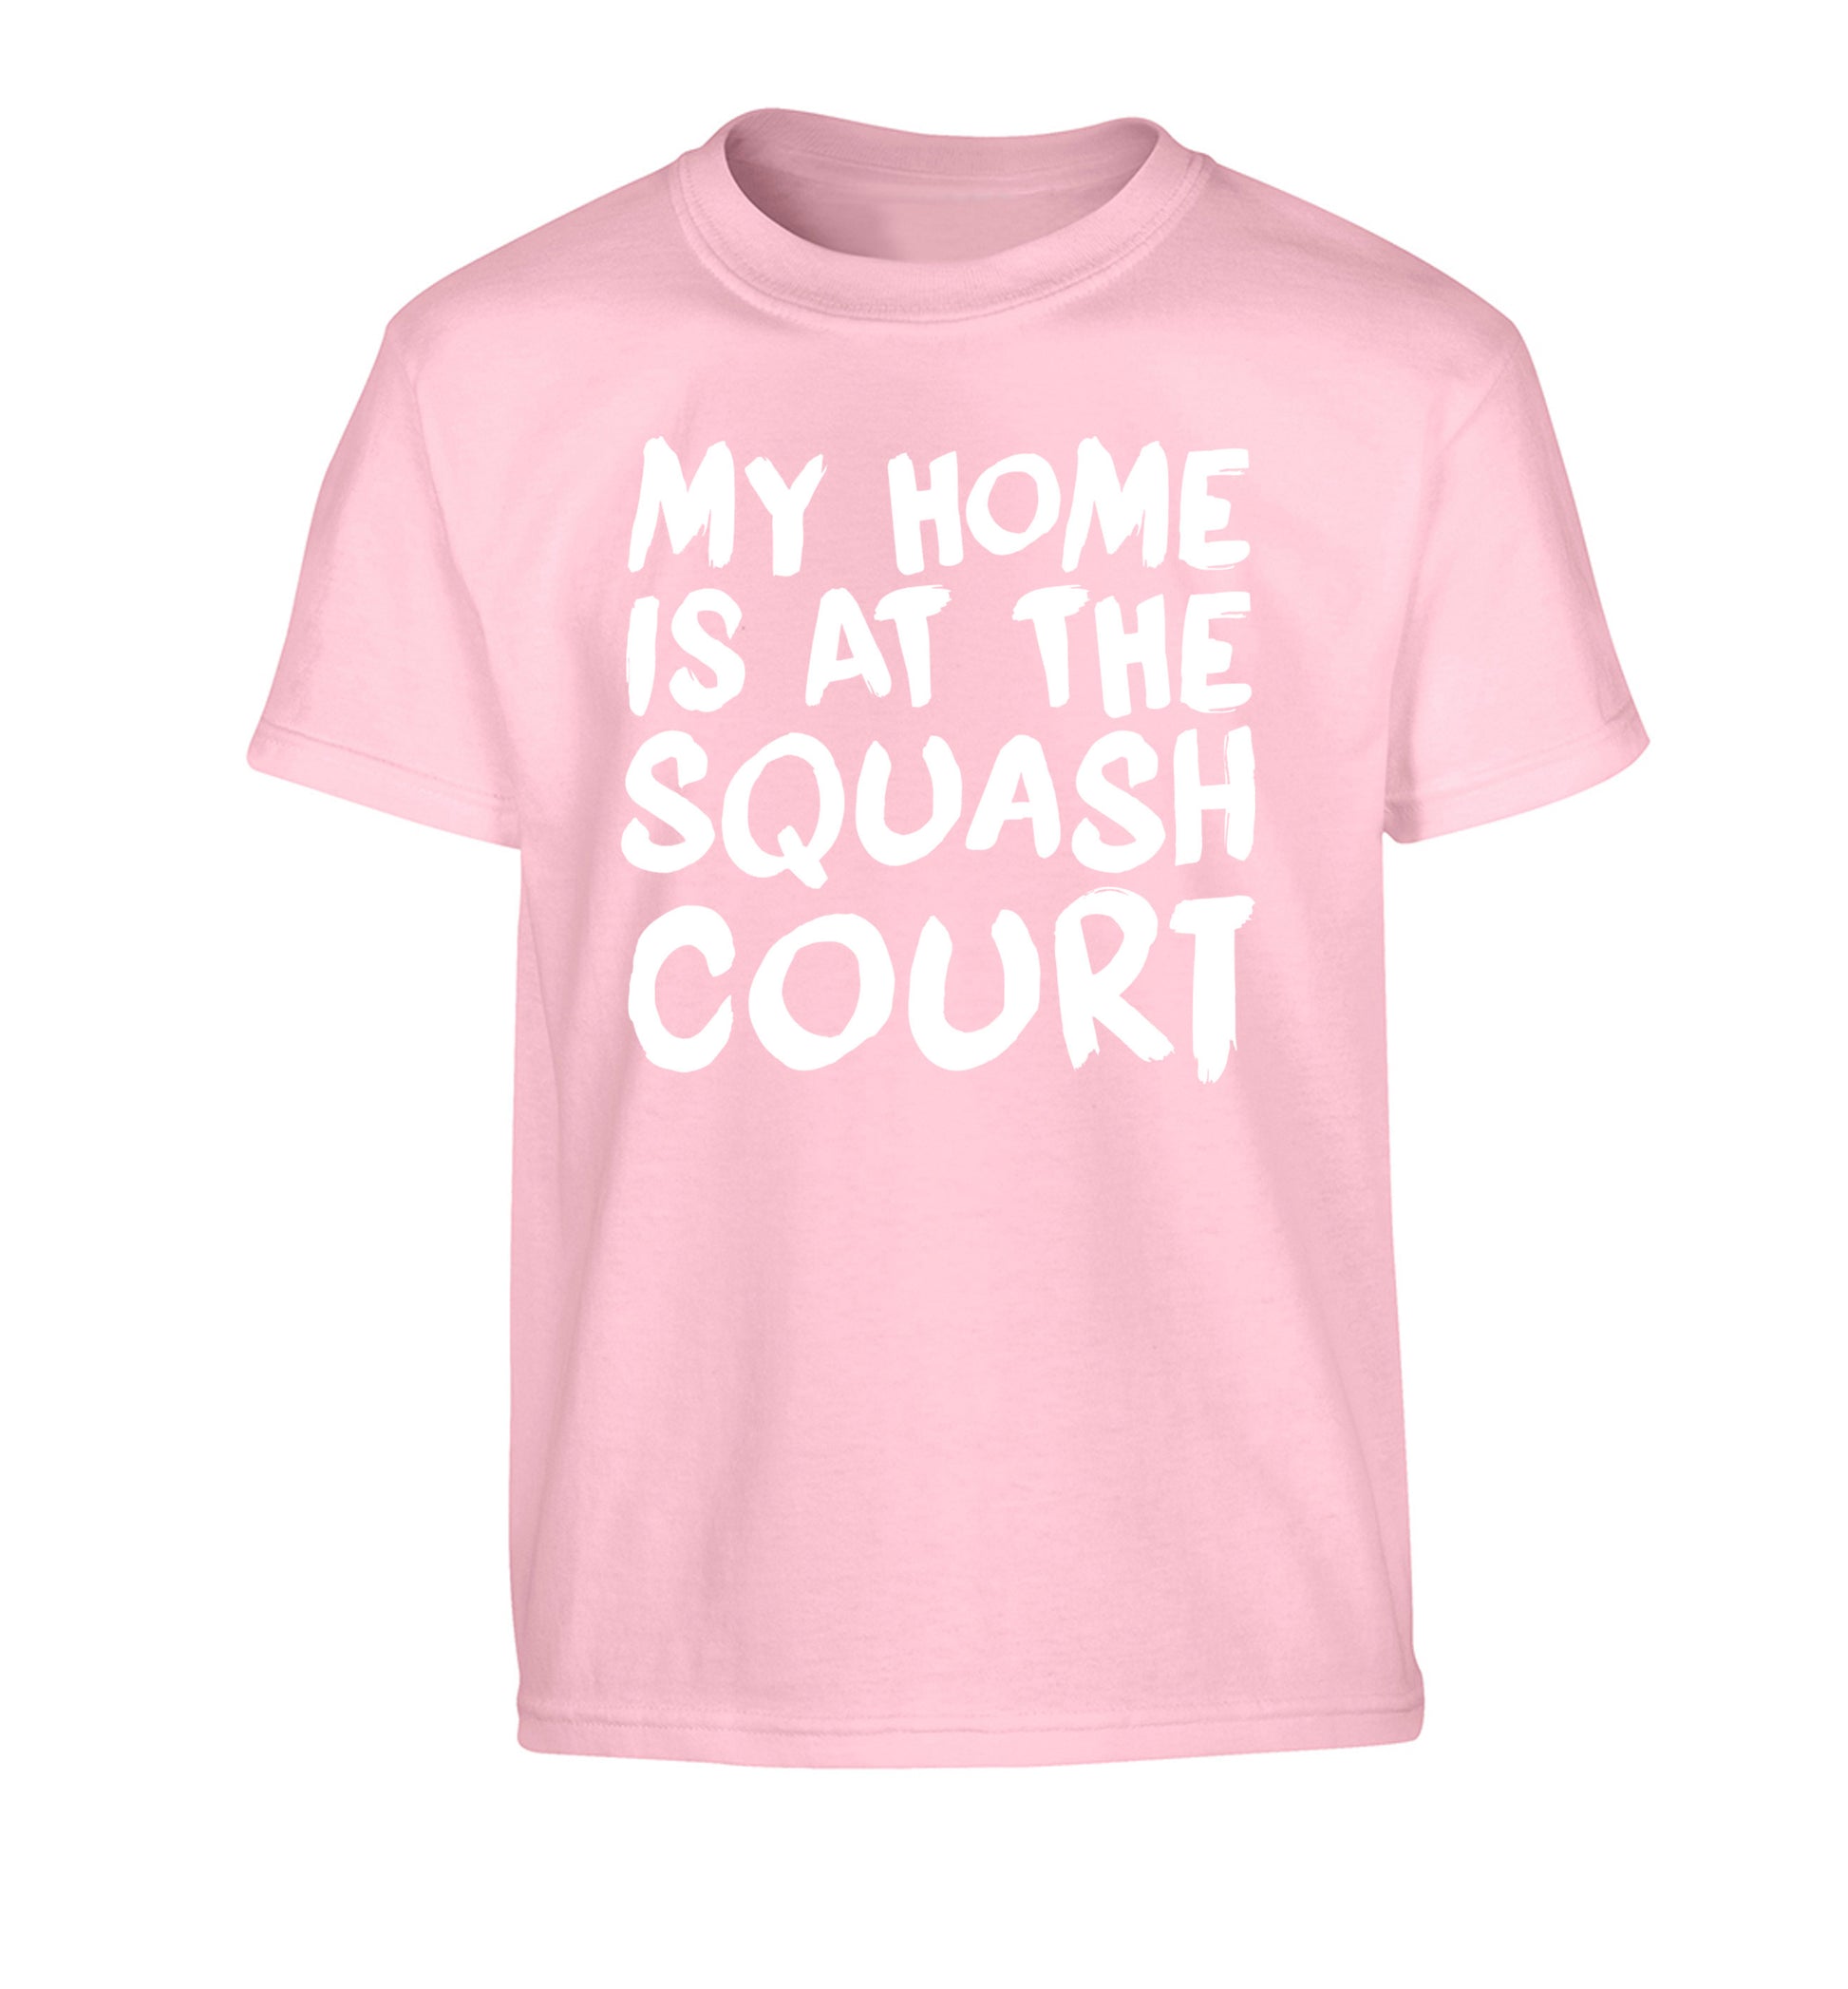 My home is at the squash court Children's light pink Tshirt 12-14 Years